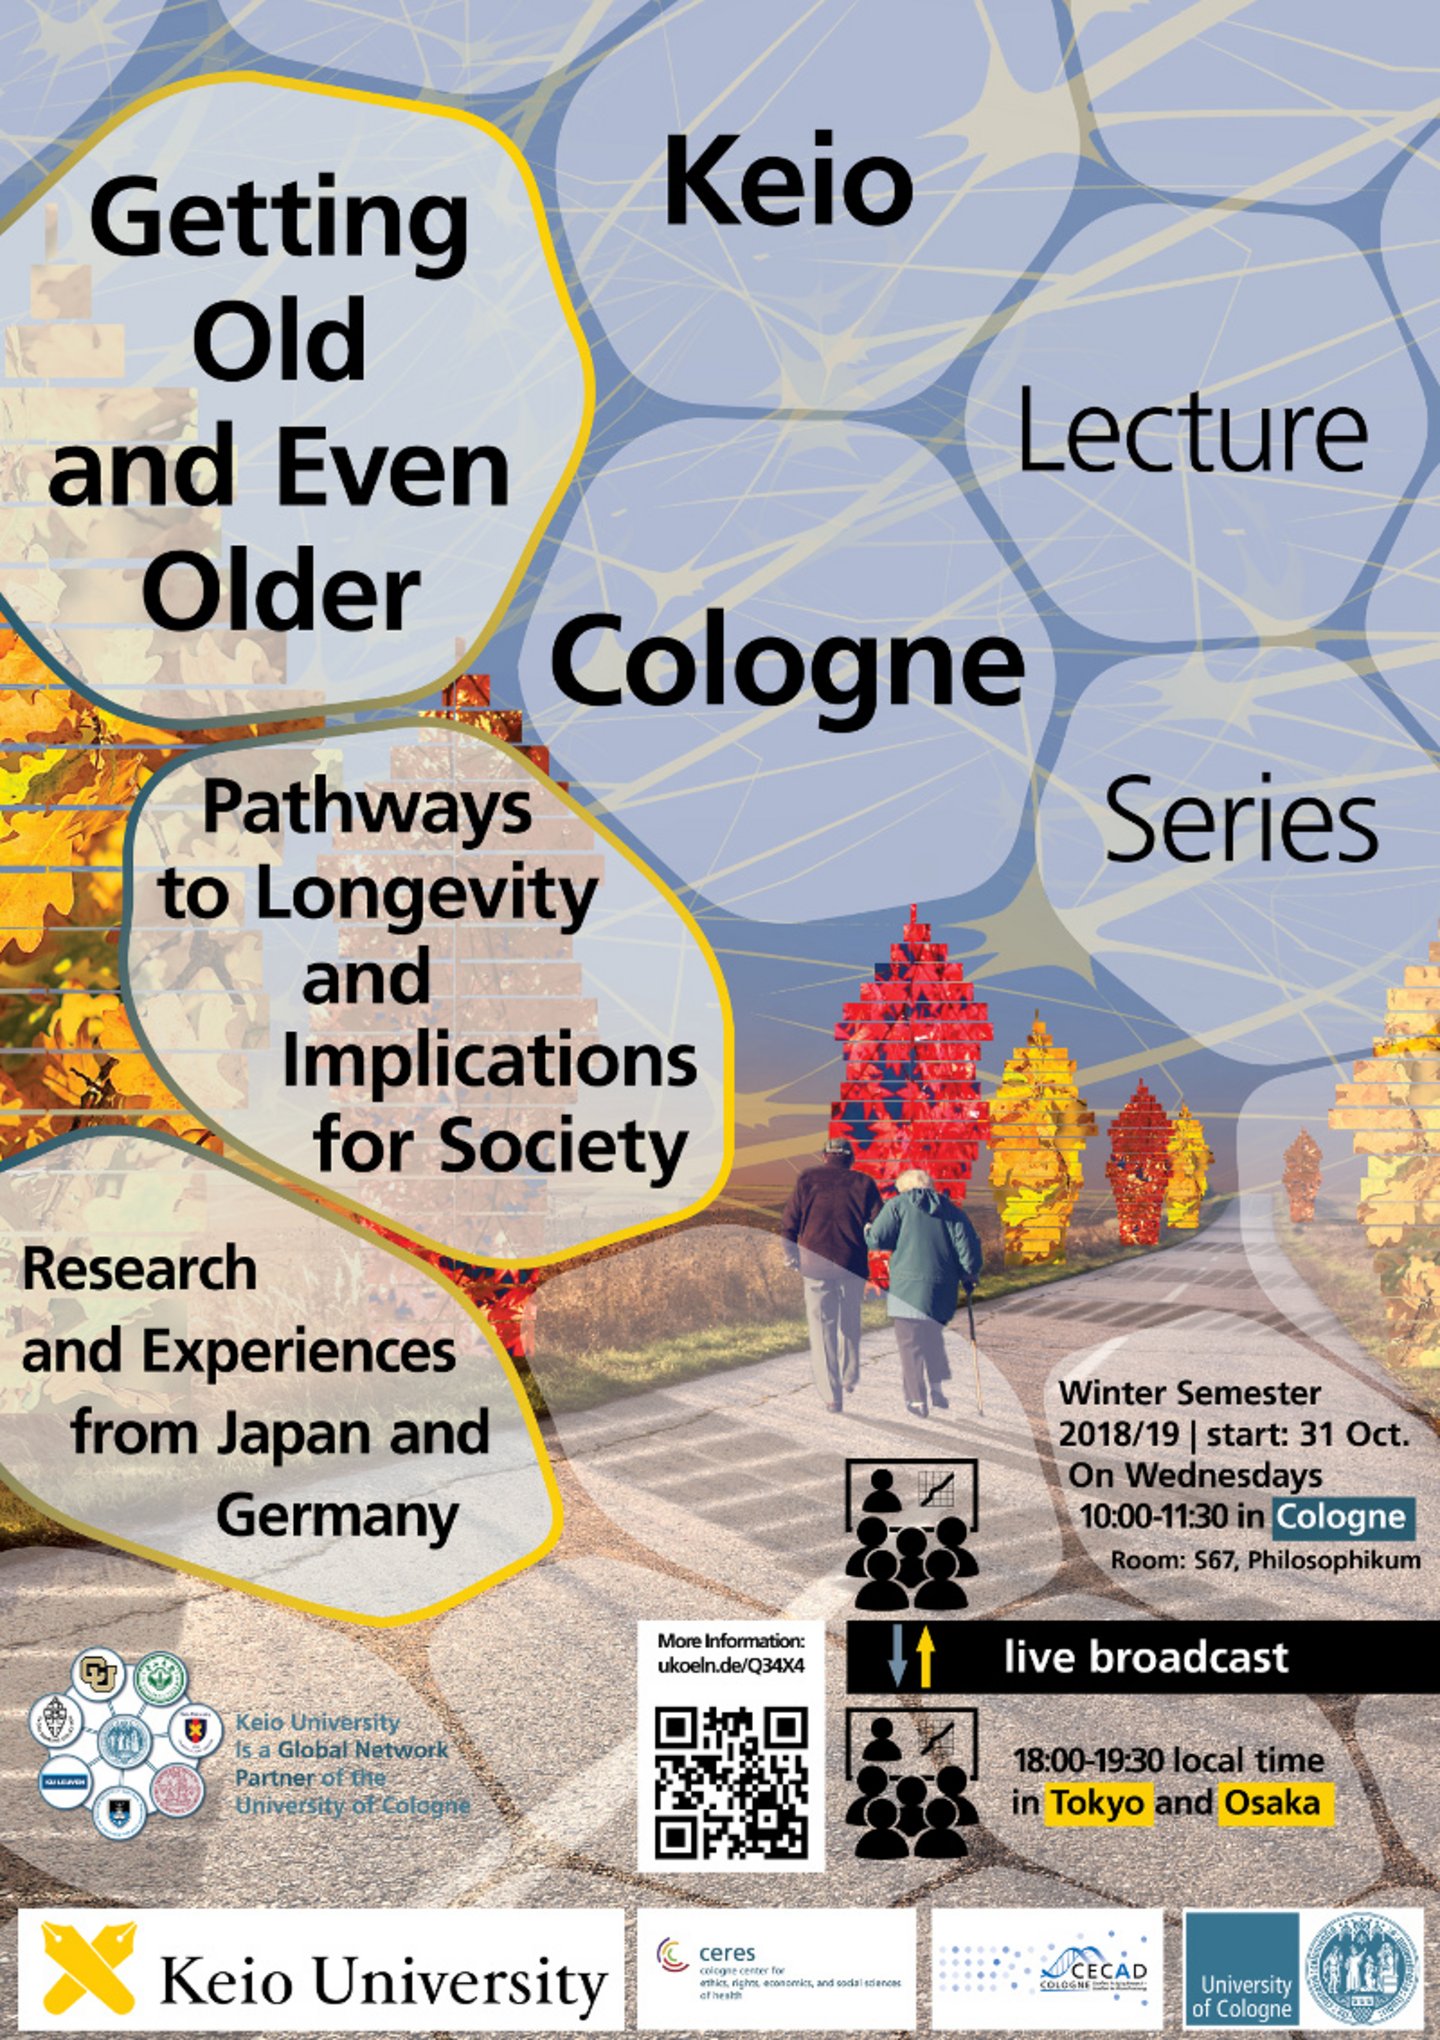 Keio Cologne Lecture Series  Title: Getting Old and Even Older – Pathways to Longevity and Implications for Society